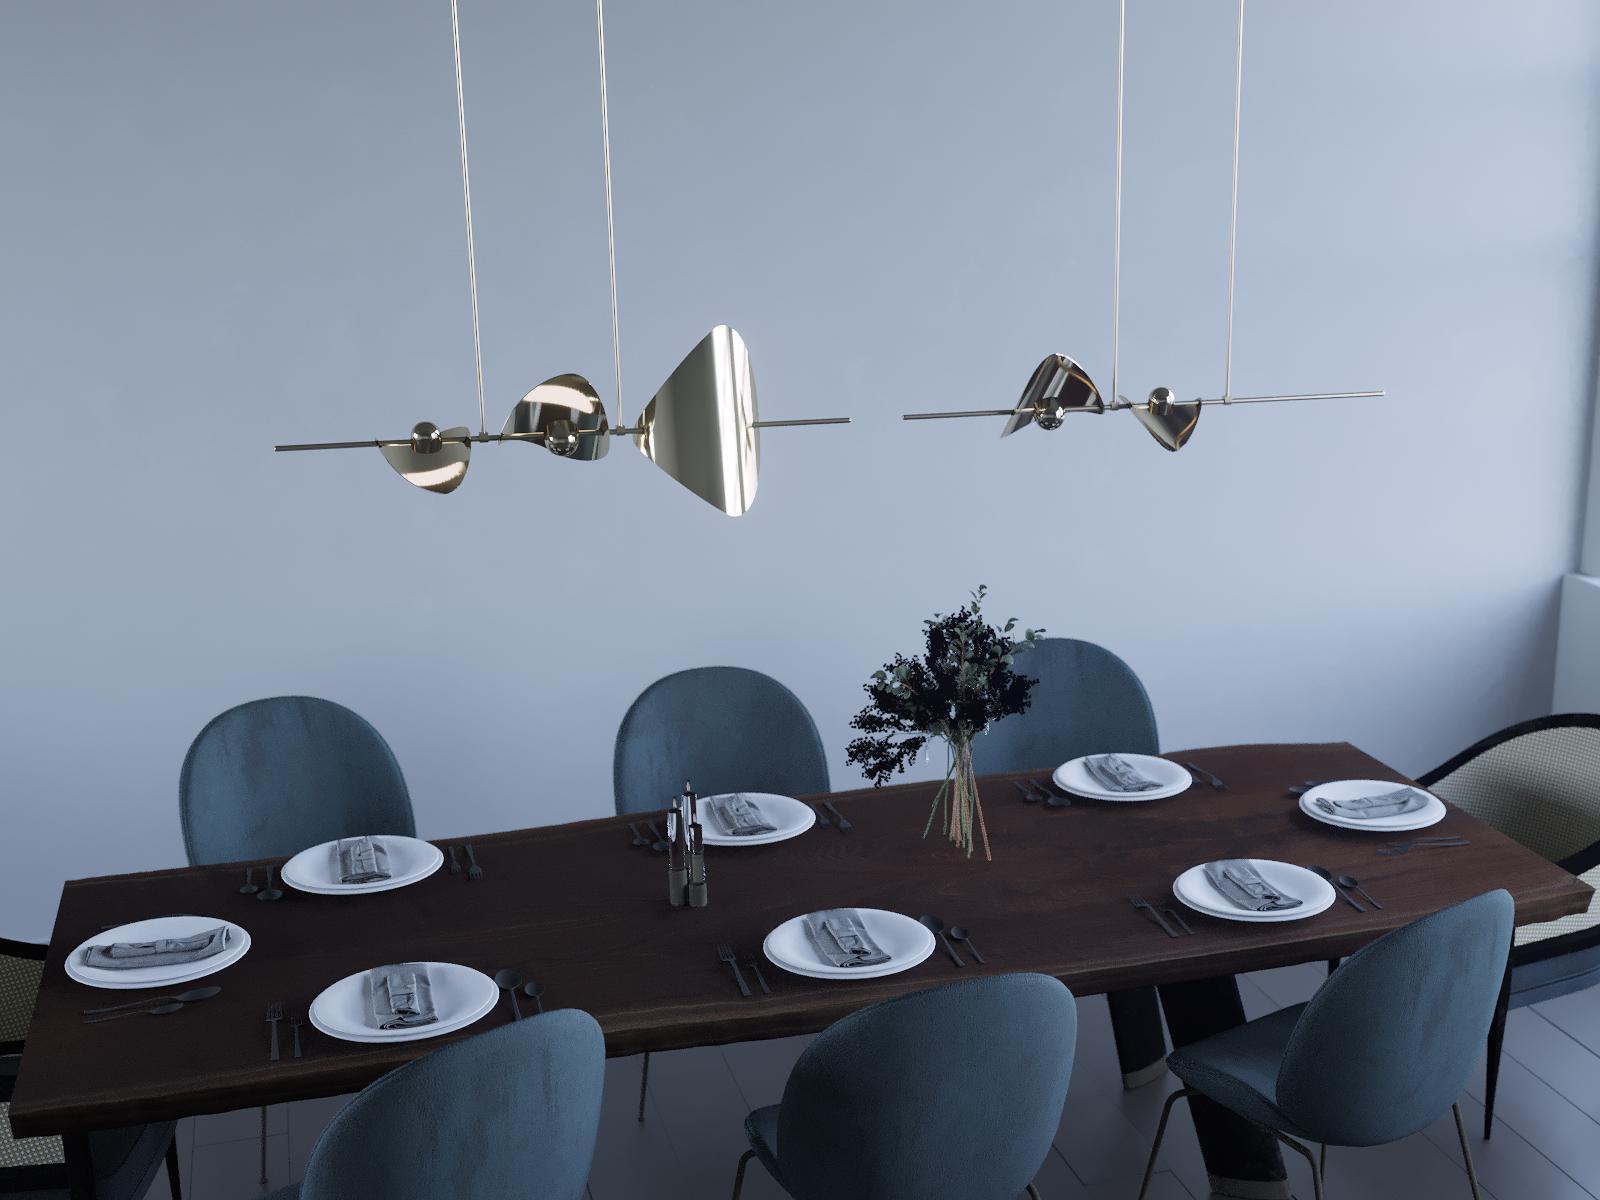 Modern Bonnie Config. 4 Contemporary Linear LED Chandelier, Solid Brass @ 300cm/118